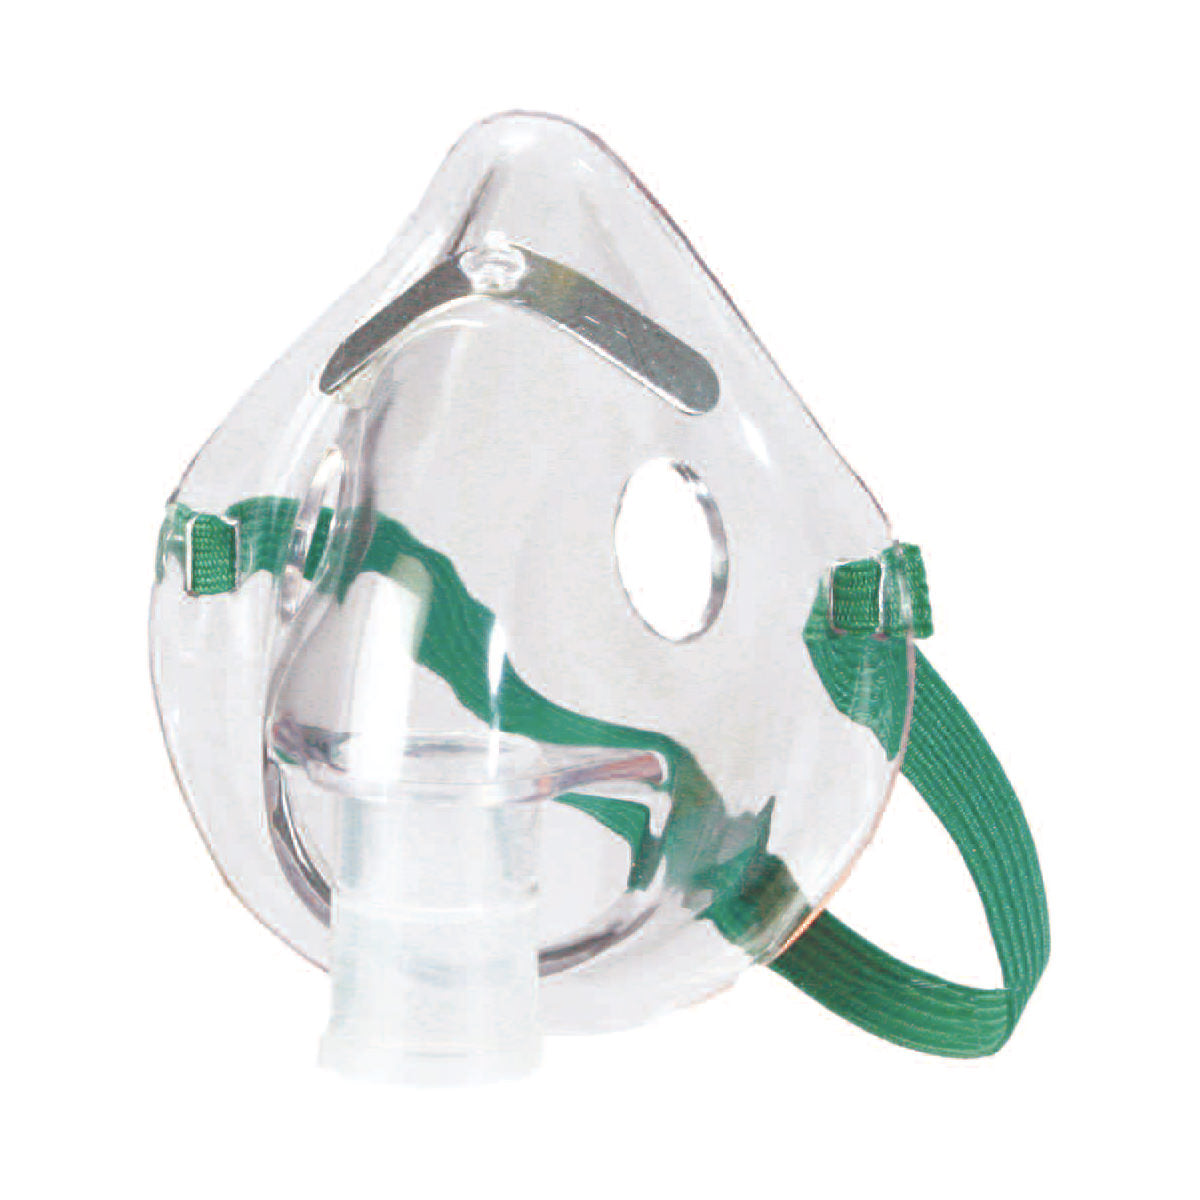 Carrying Case - Nebulizer Parts - Respiratory Therapy Parts